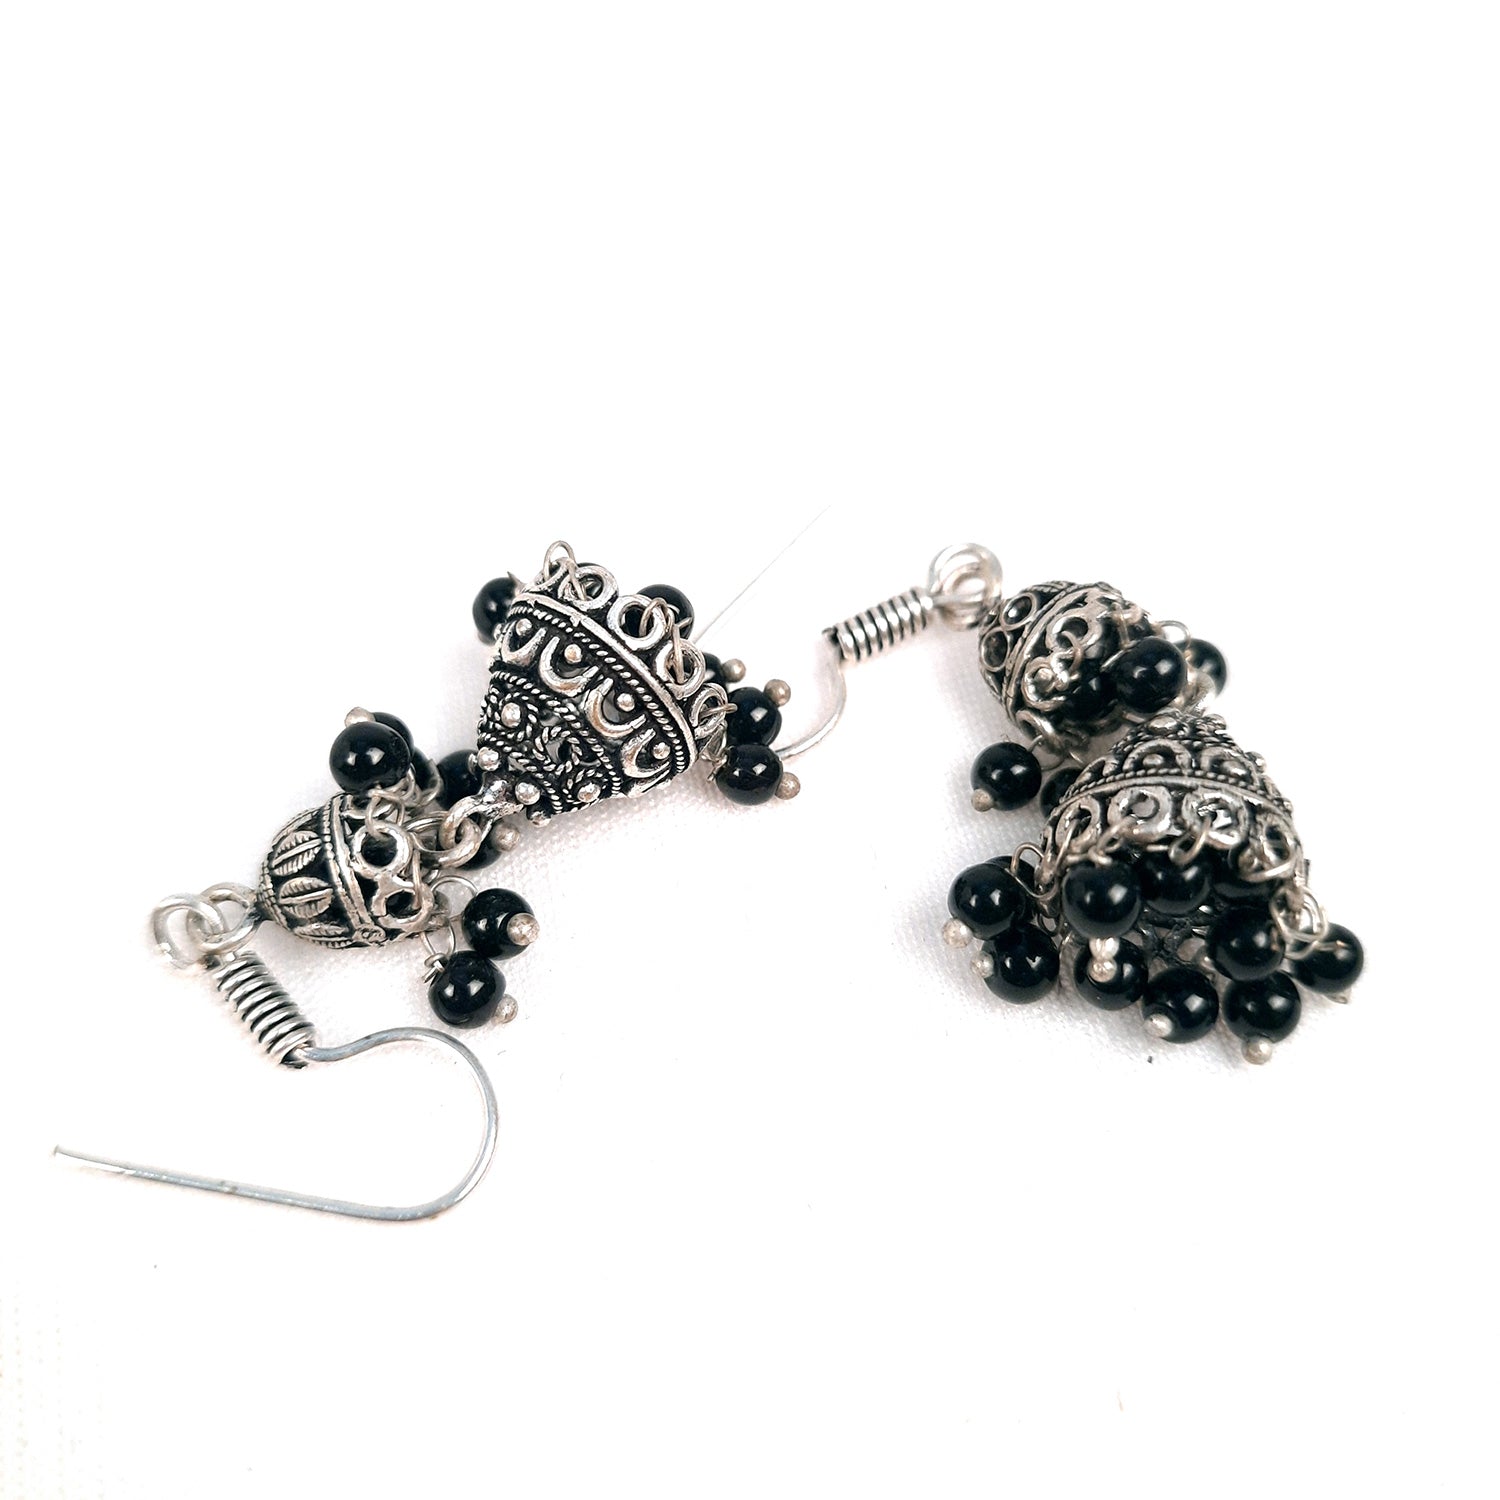 Earrings for Women & Girls - Jhumka With Black Beads | Silver Oxidised Latest Stylish Fashion Jewellery | Gift for Her - Apkamart